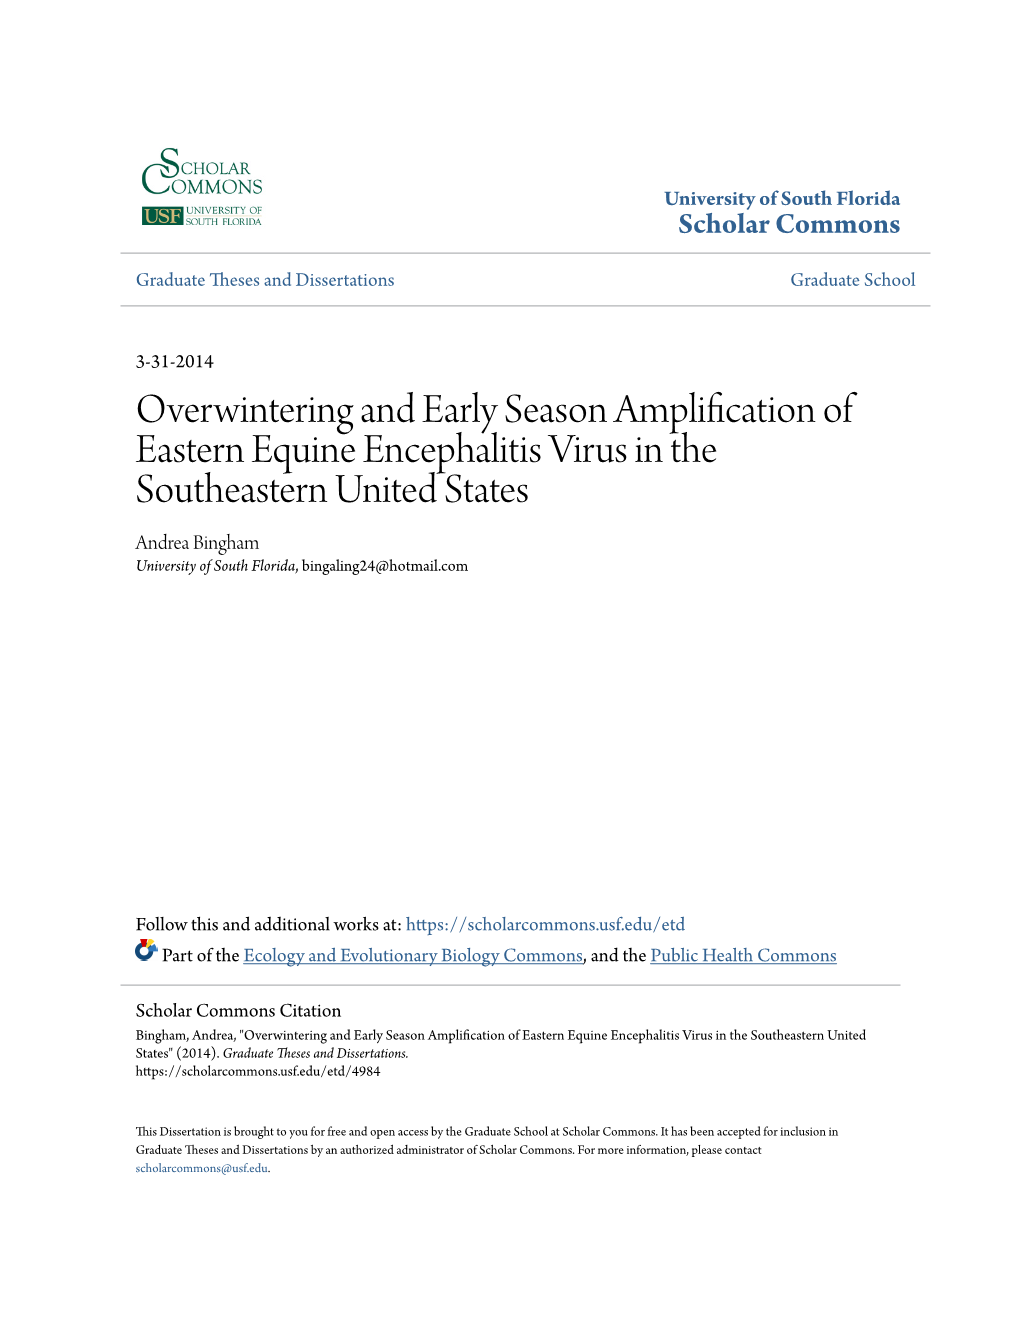 Overwintering and Early Season Amplification of Eastern Equine